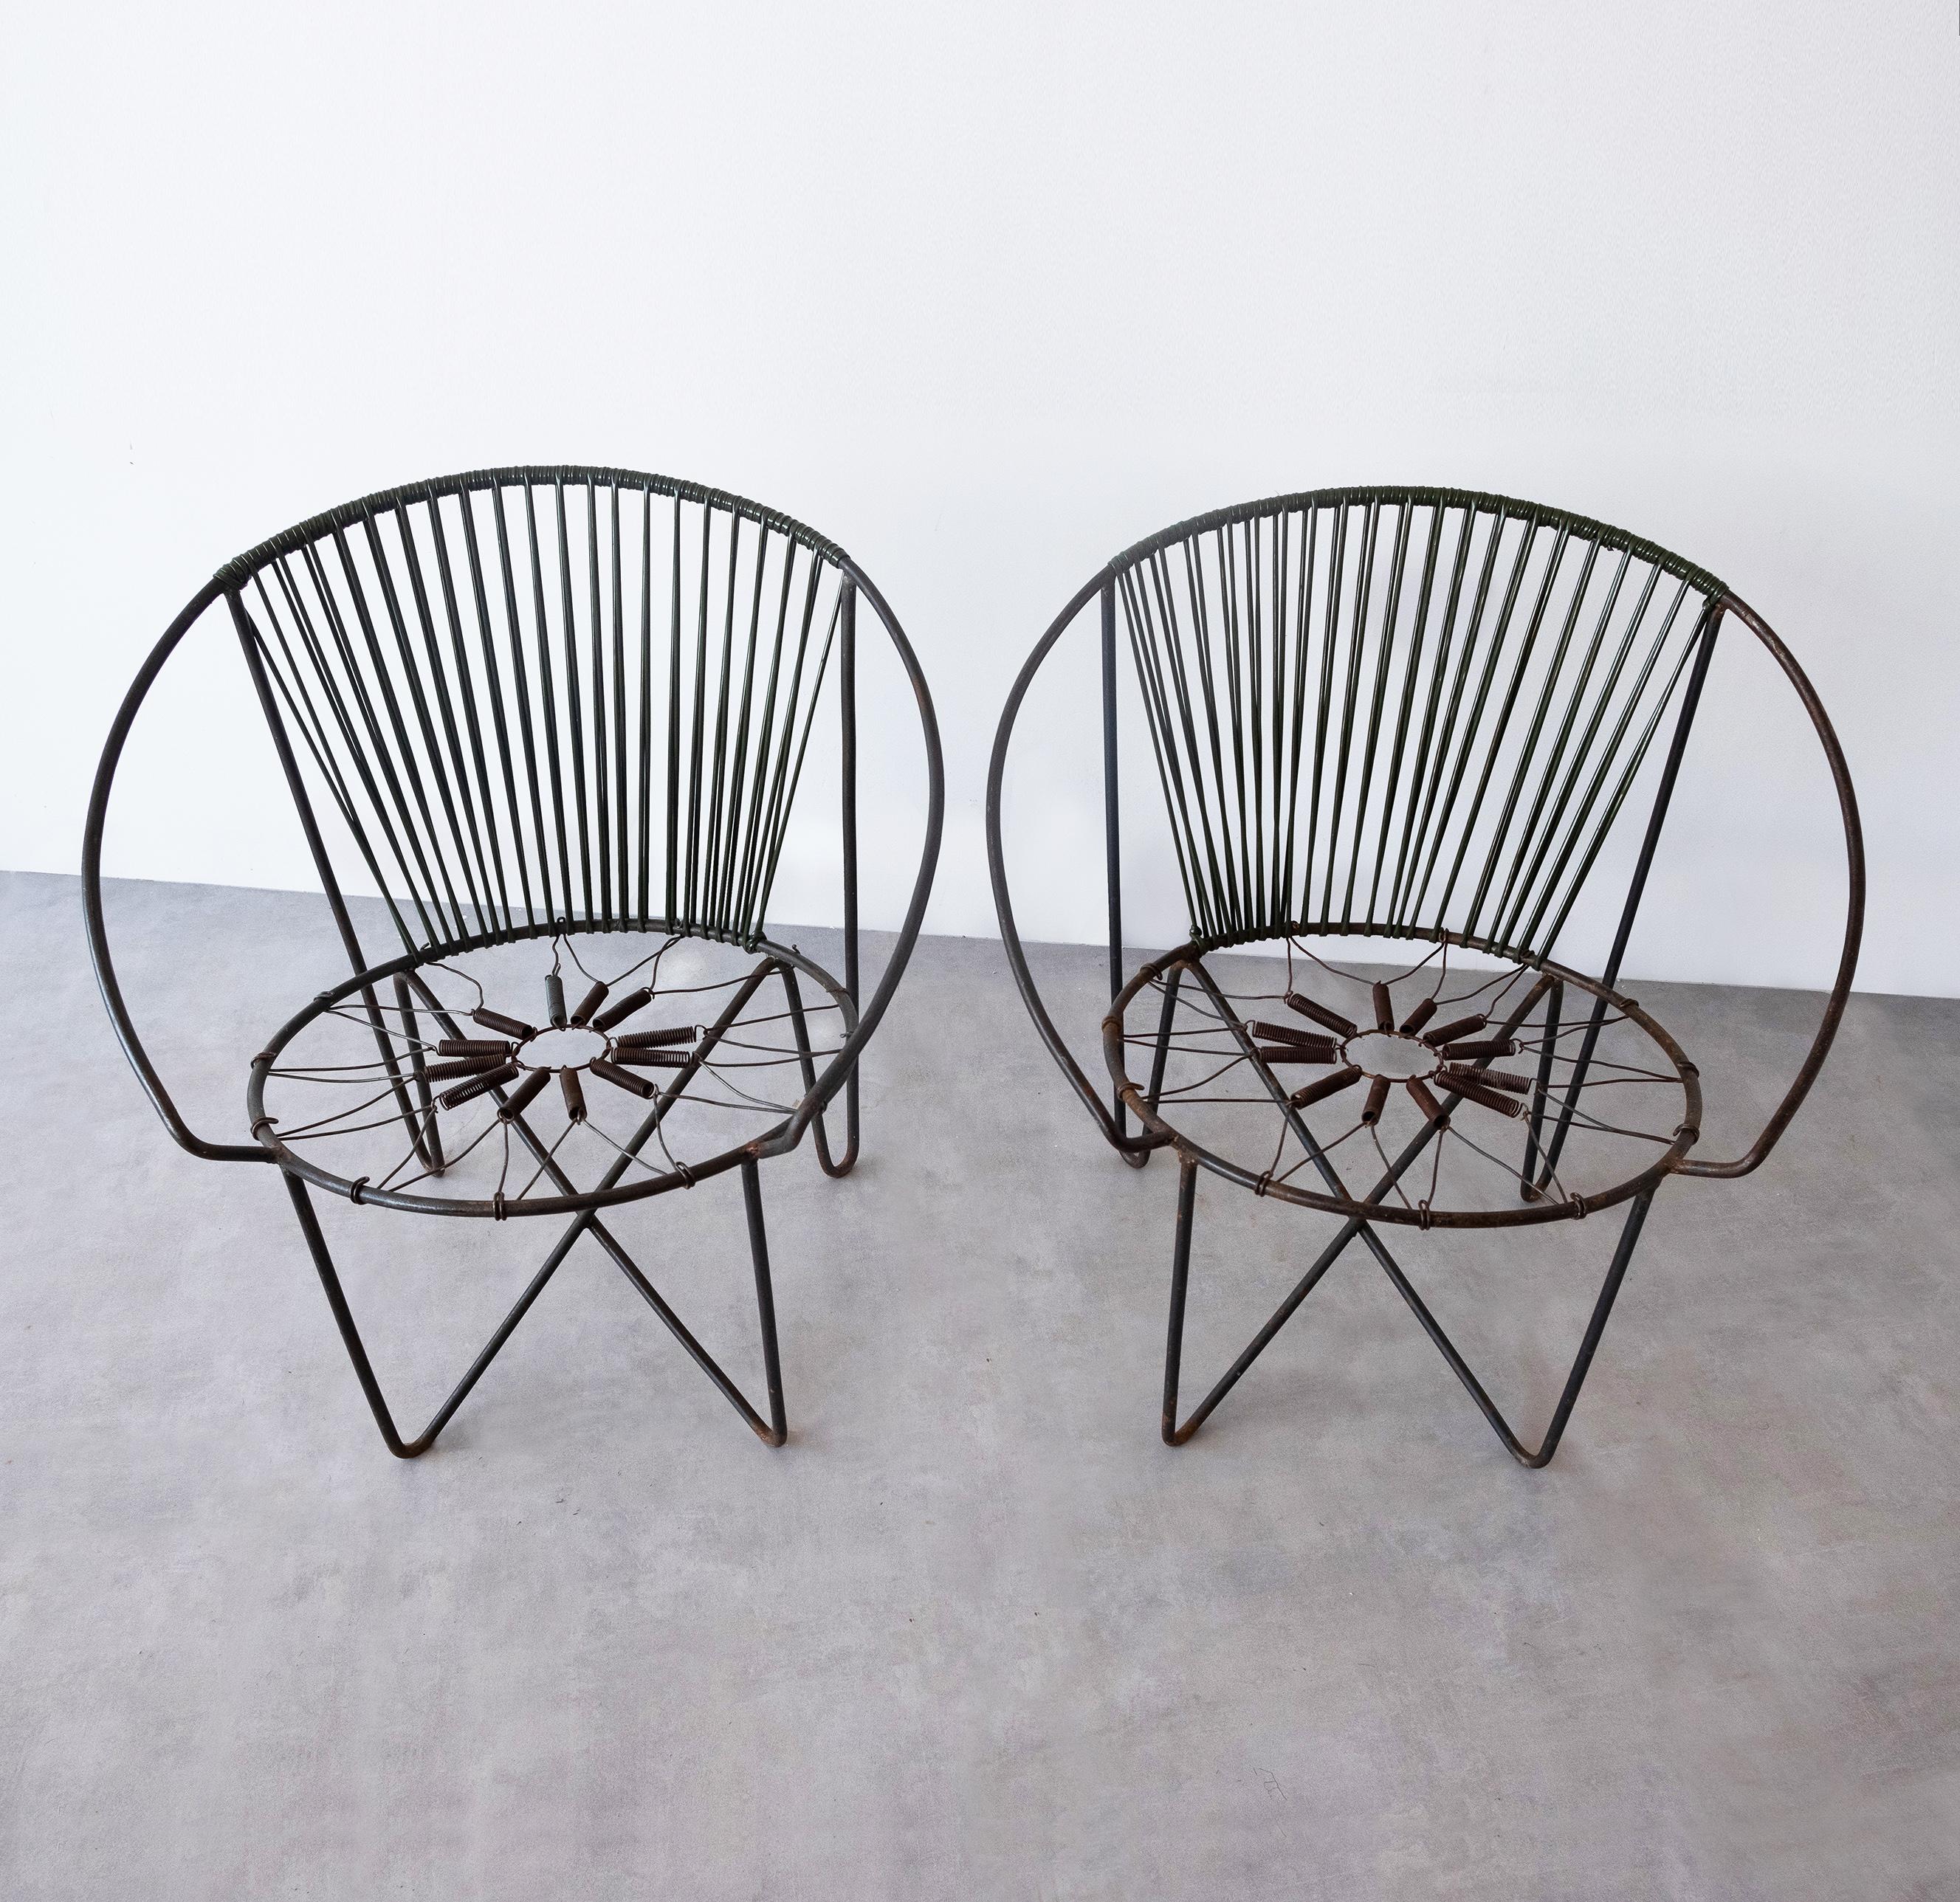 Awesome unique chairs by Zanine! 

In true 1950s style, these rare and unique pieces are testimony of the genius of Zanine, a self taught artist who kept innovating and pushing barriers of his own design language throughout his career.
In these